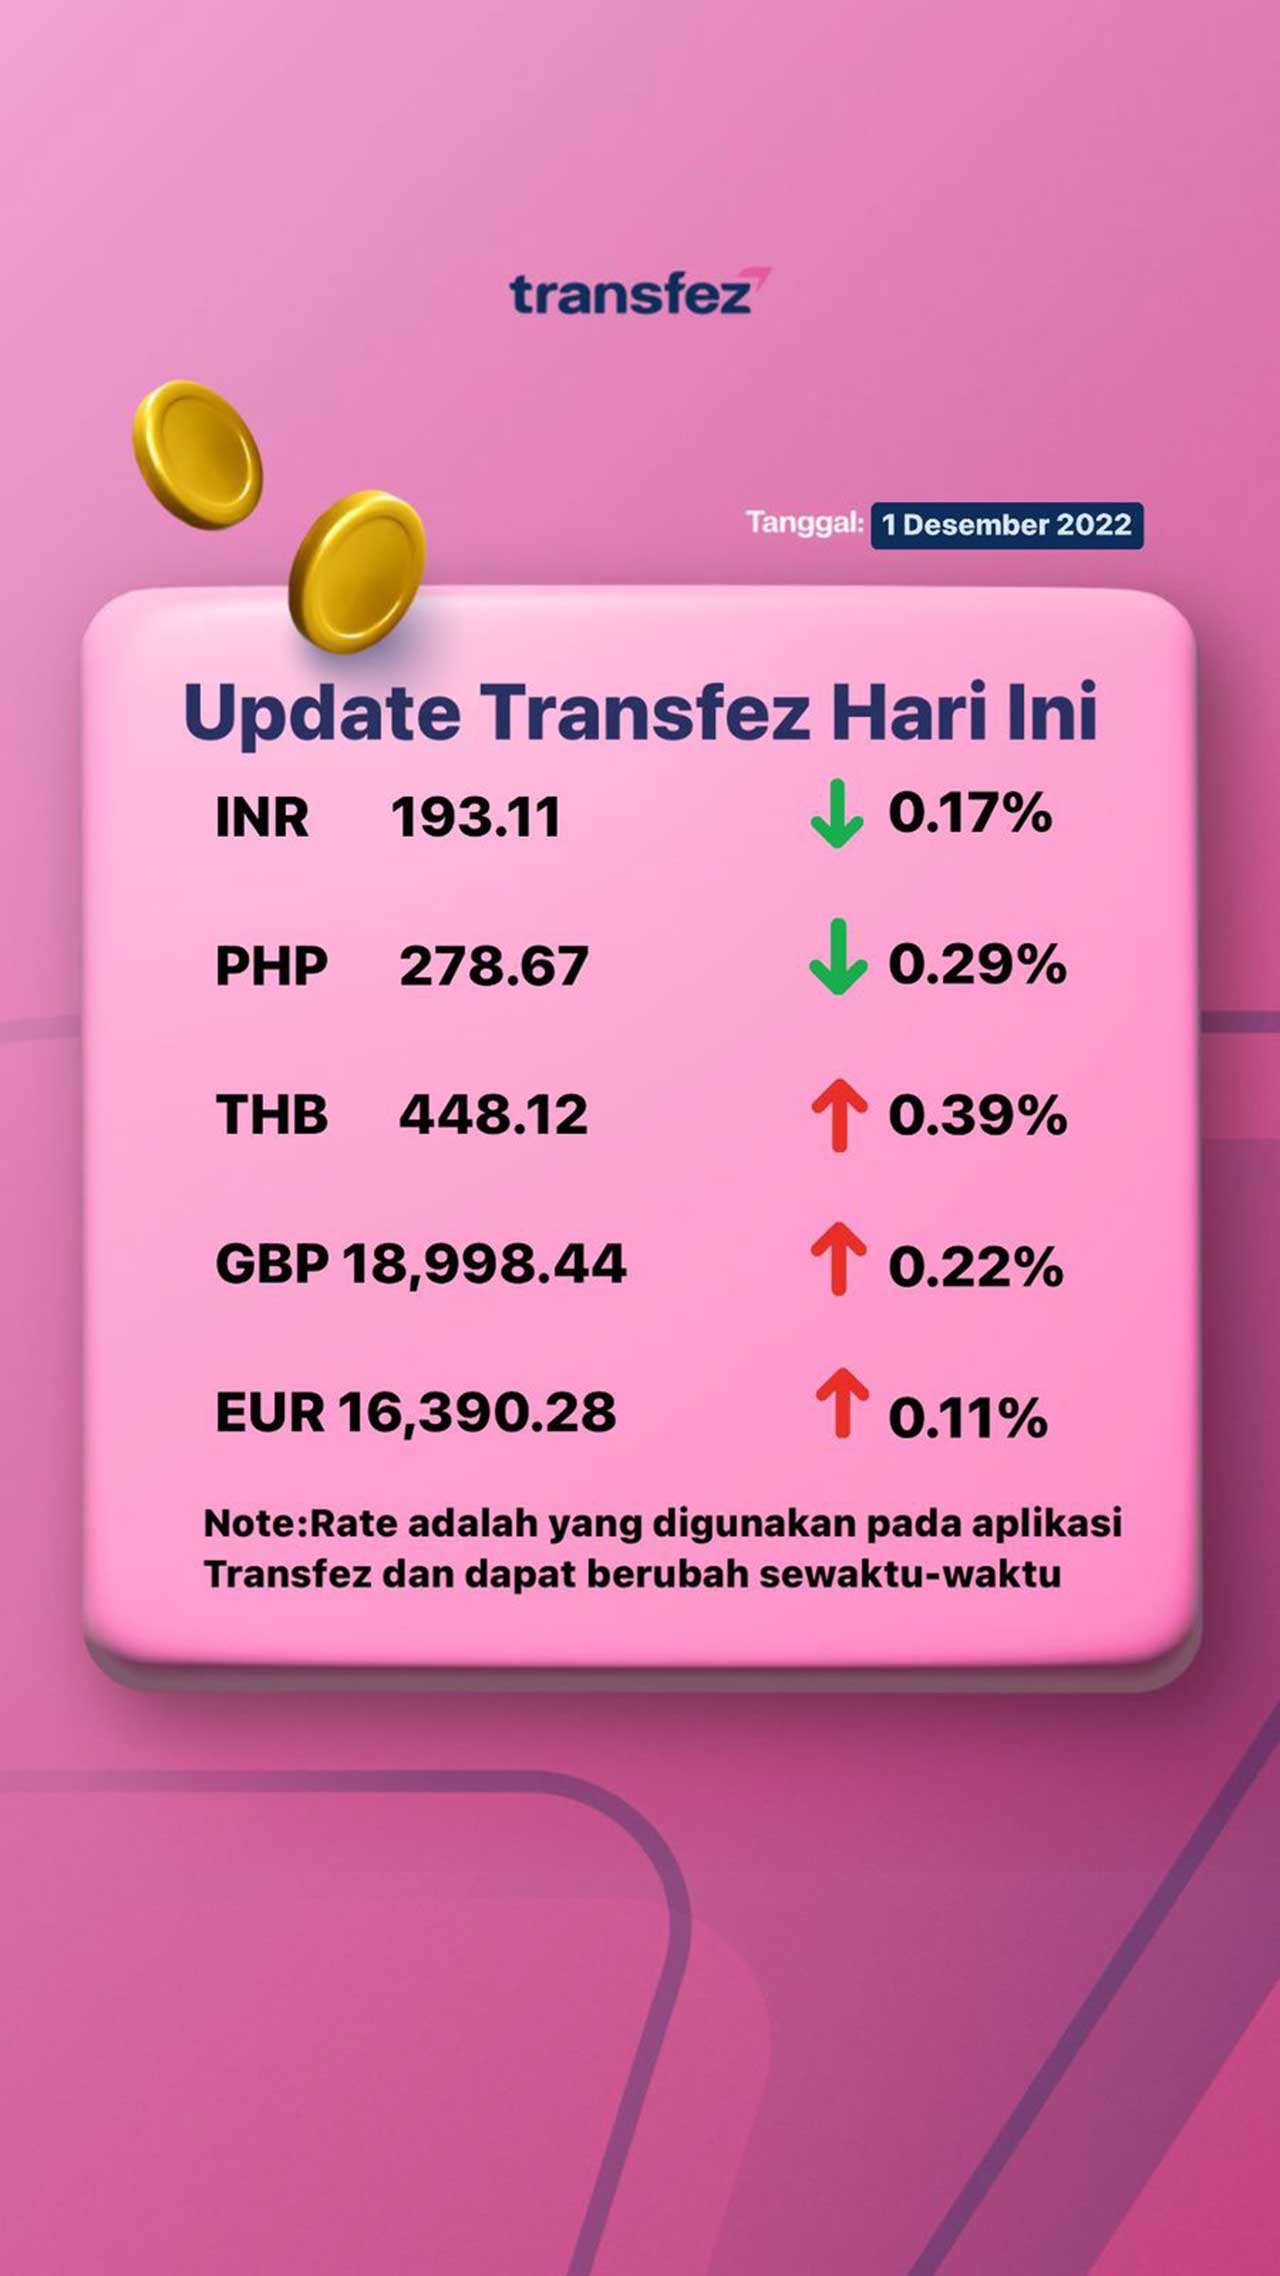 Today's Transfez Rate Update 01 December 2022